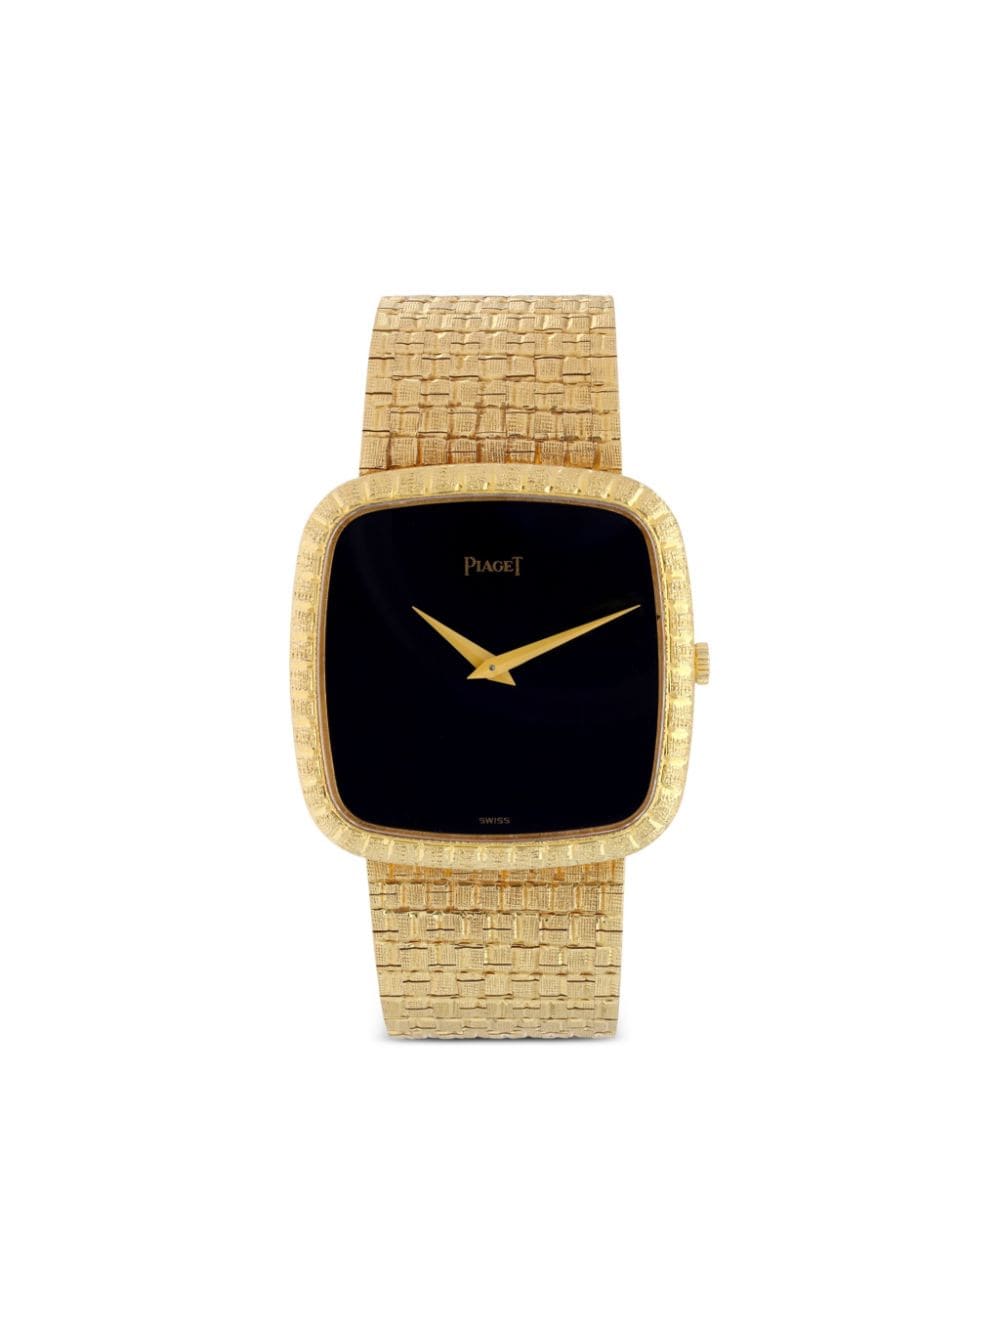 Piaget pre-owned Classic 30mm - Black von Piaget